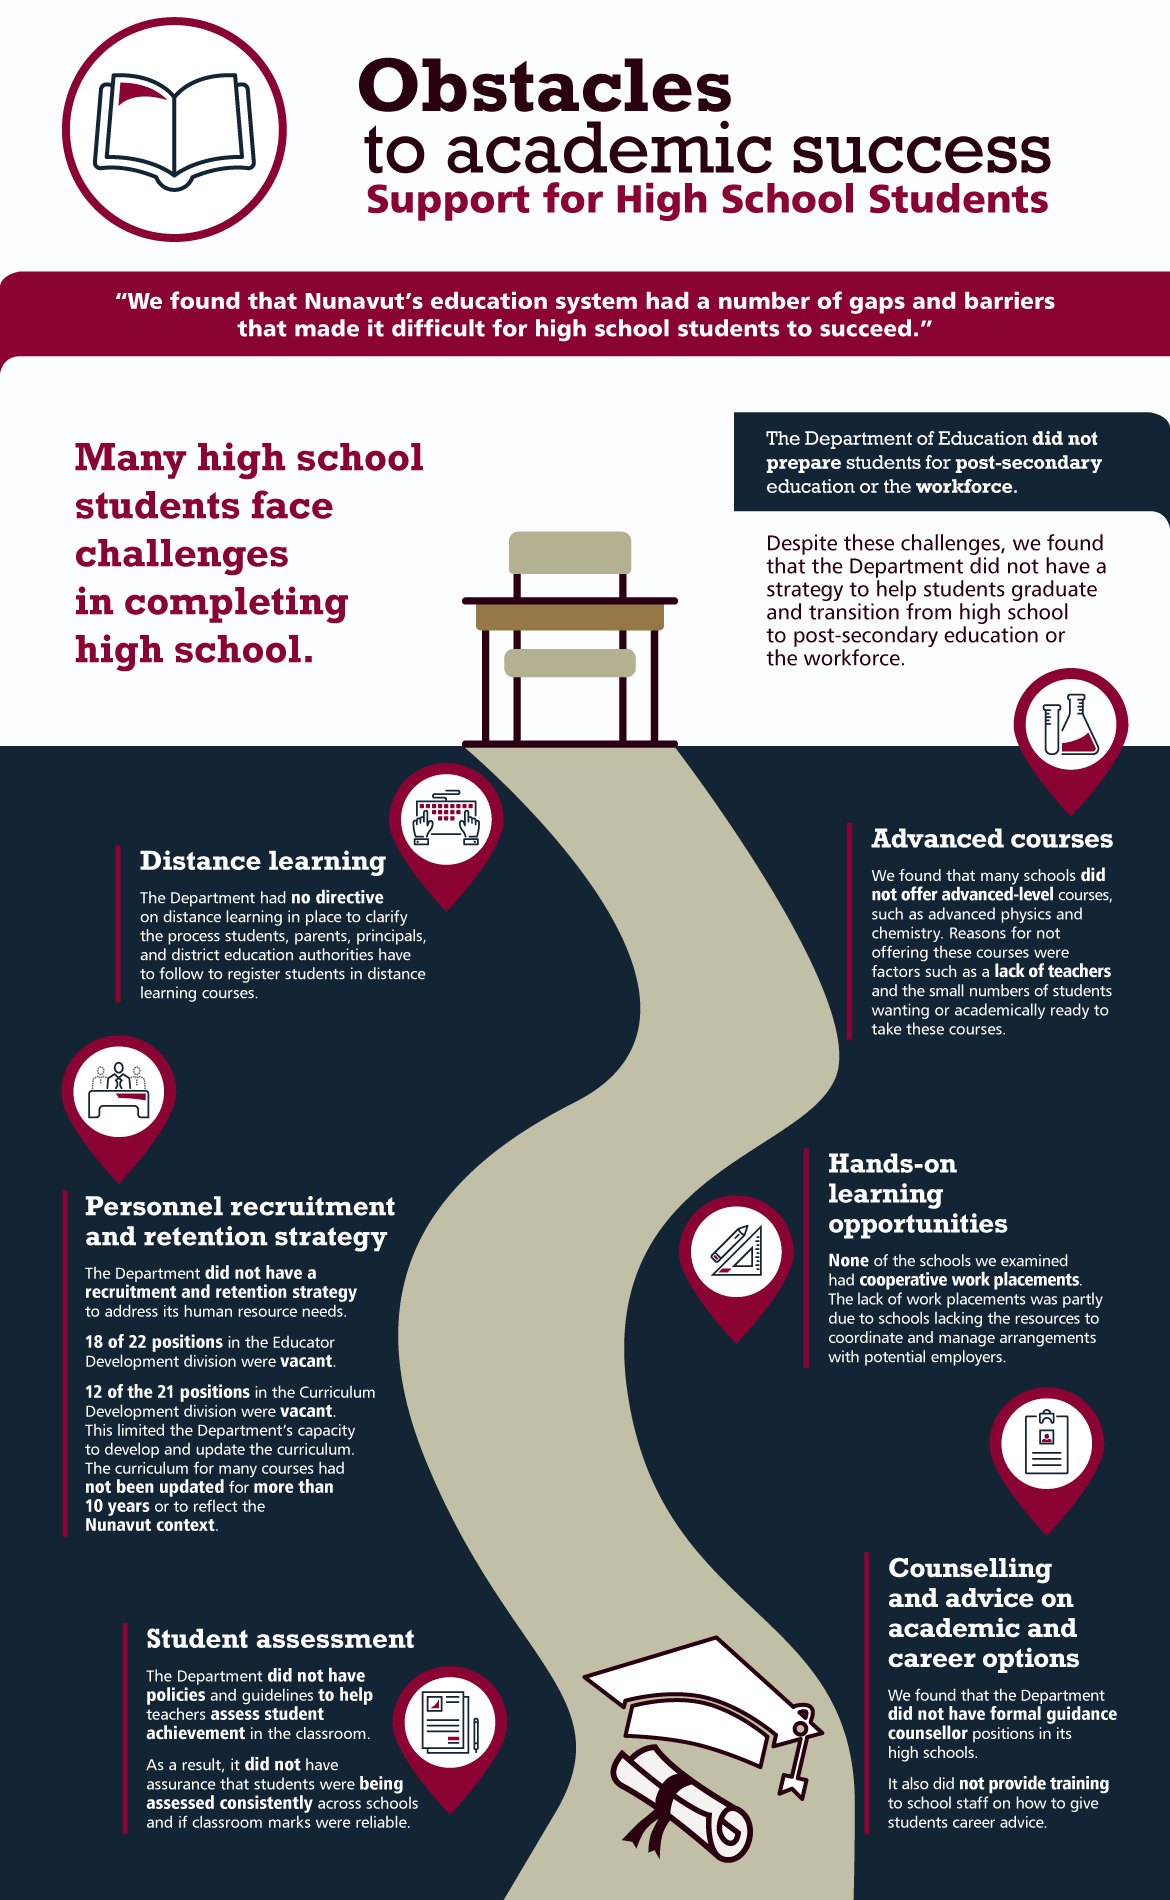 This infographic presents findings from the audit of support for high school students and adult learners in Nunavut